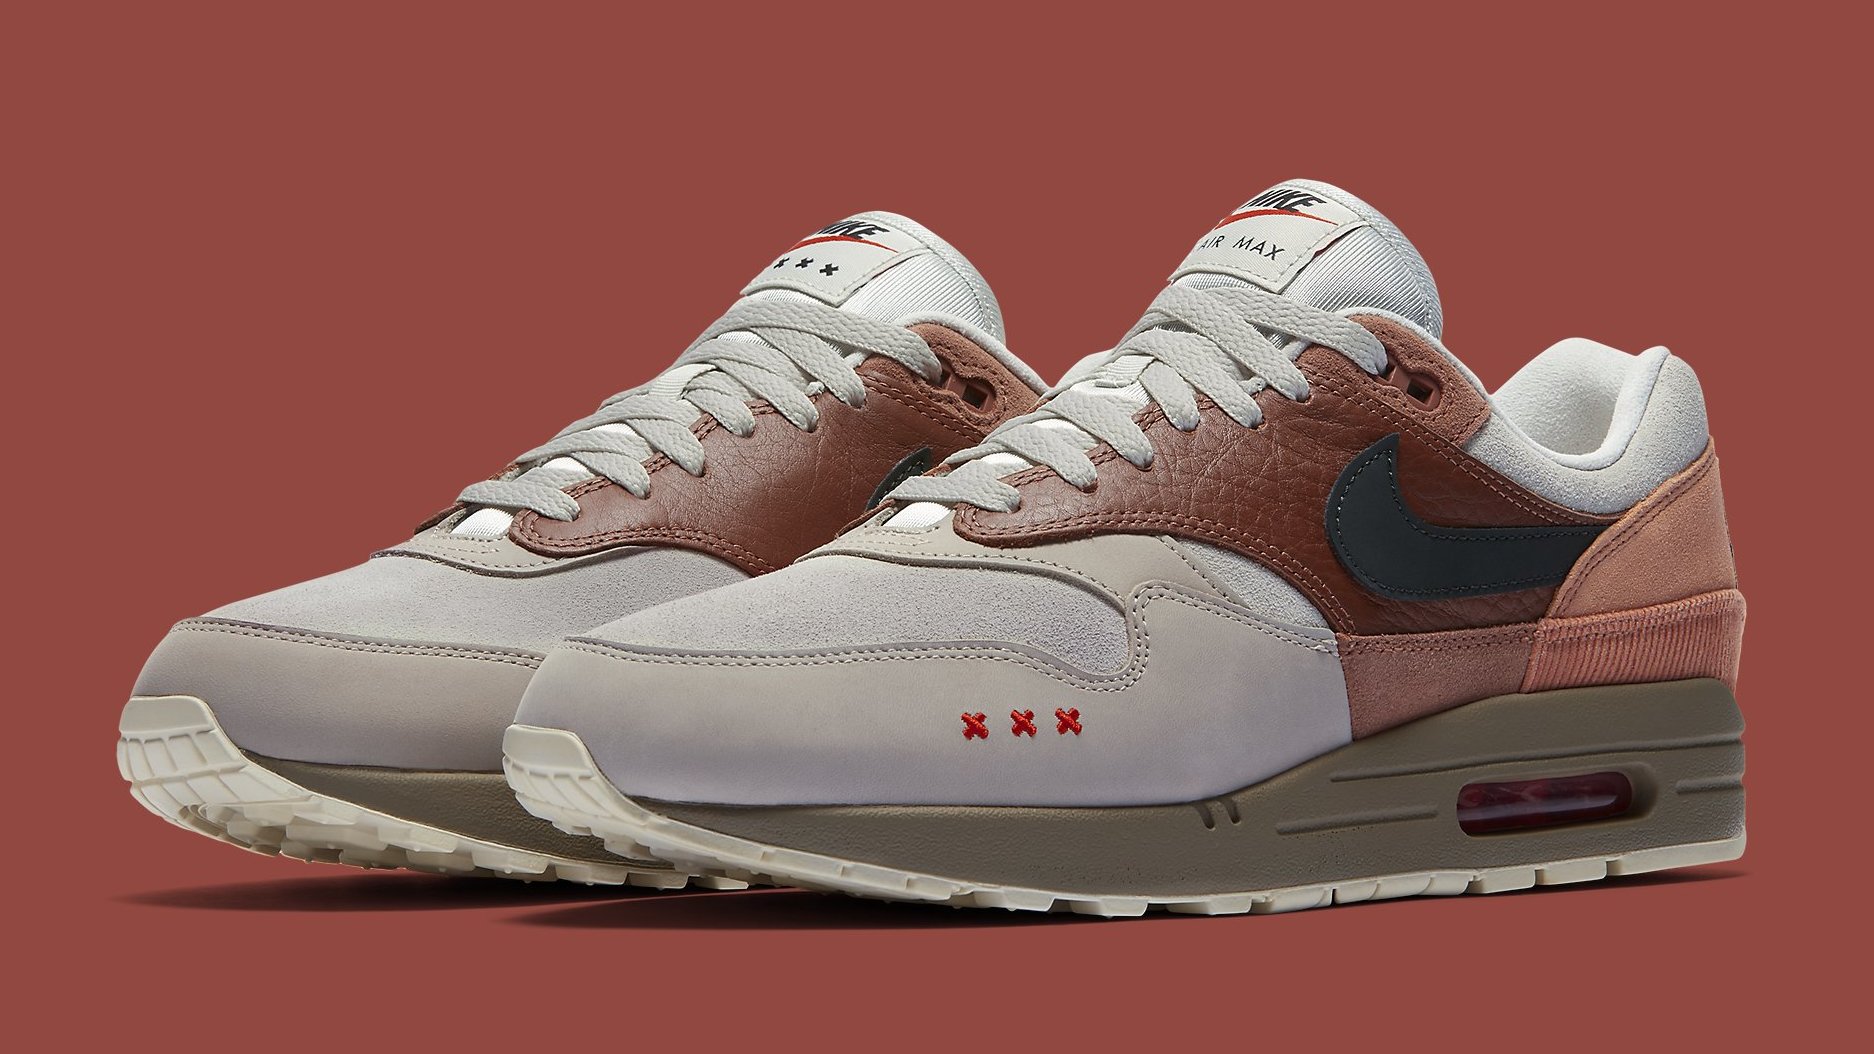 Nike Air Max 1 'City Pack' Amsterdam London Release Date CV1638-200  CV1639-001 | Sole Collector